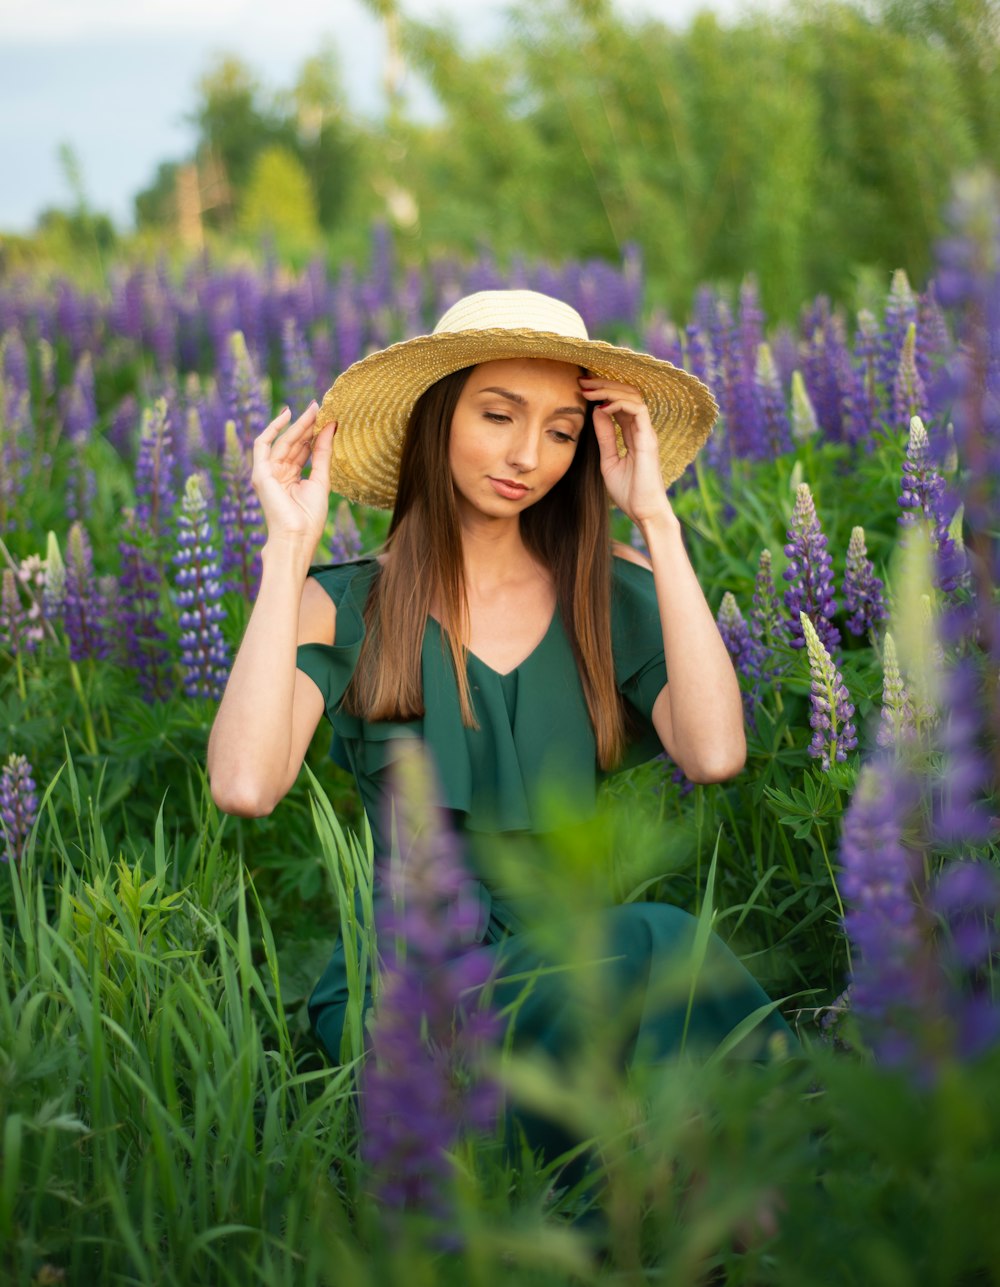 woman in green tank top and brown straw hat standing on purple flower field during daytime